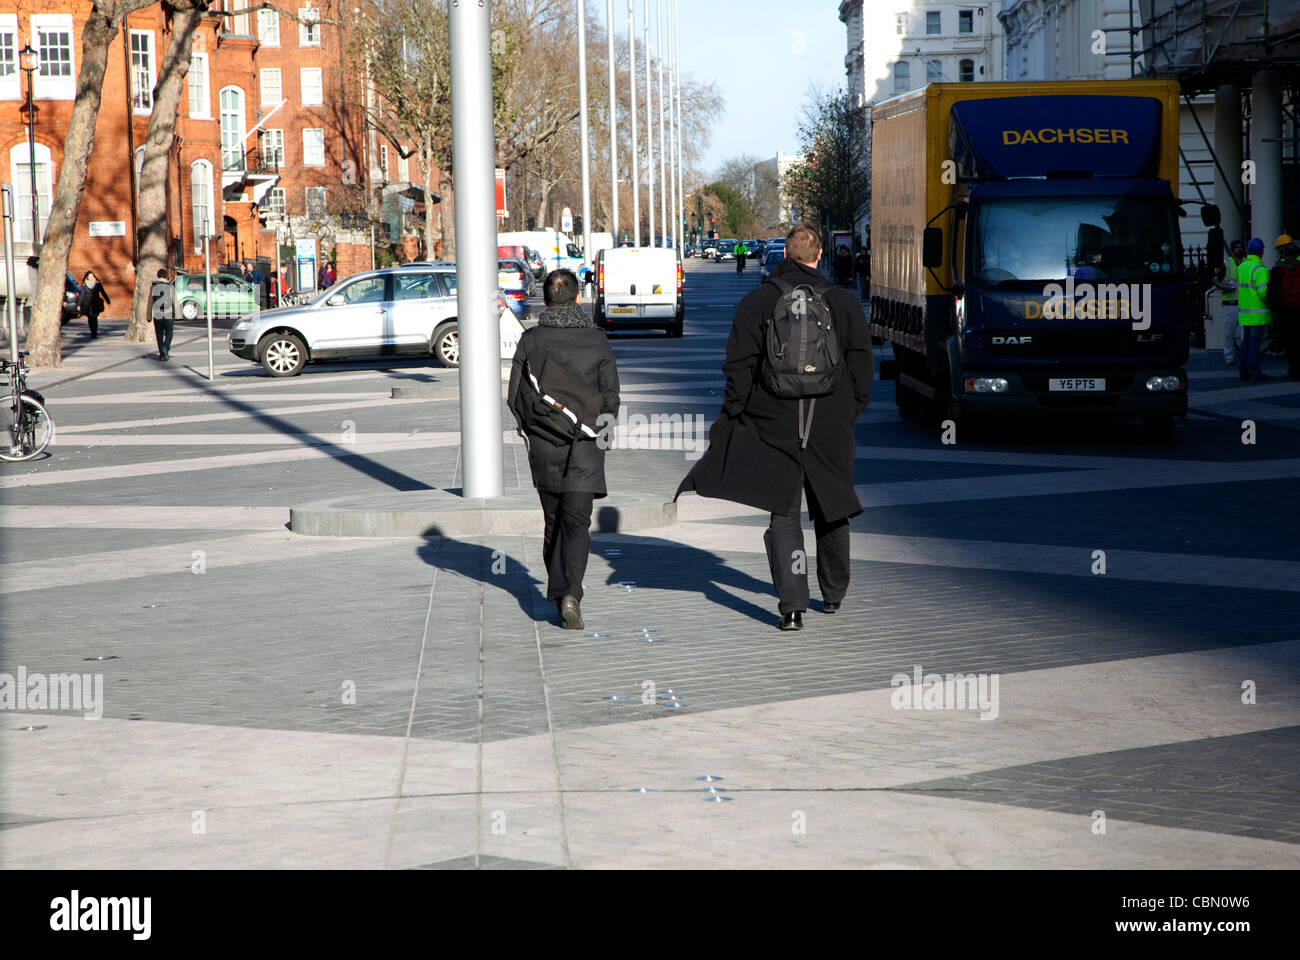 Shared space traffic scheme in Exhibition Road, South Kensington, London Stock Photo